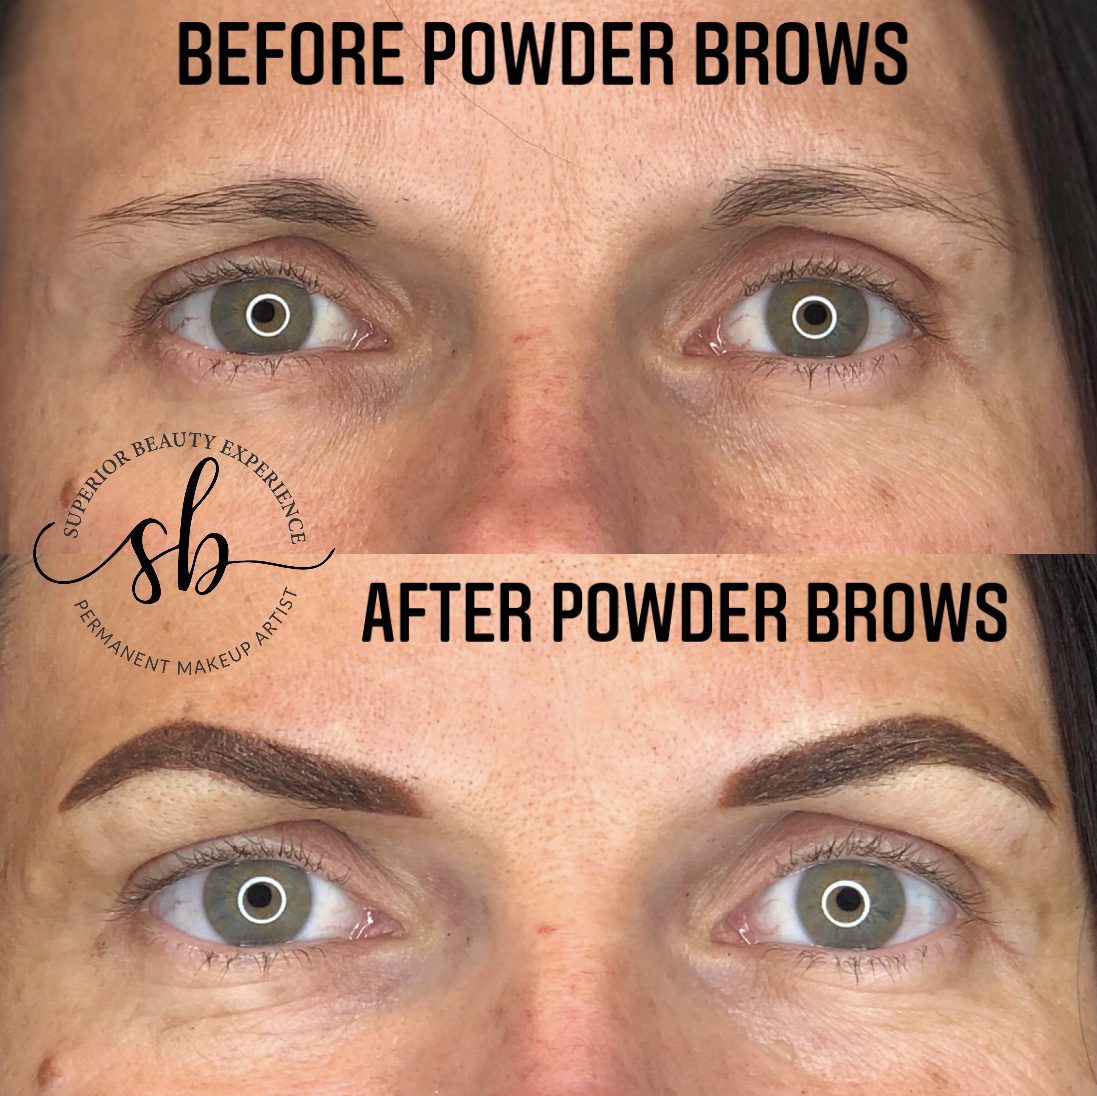 powder brows before & after - superior beauty experience waco, texas